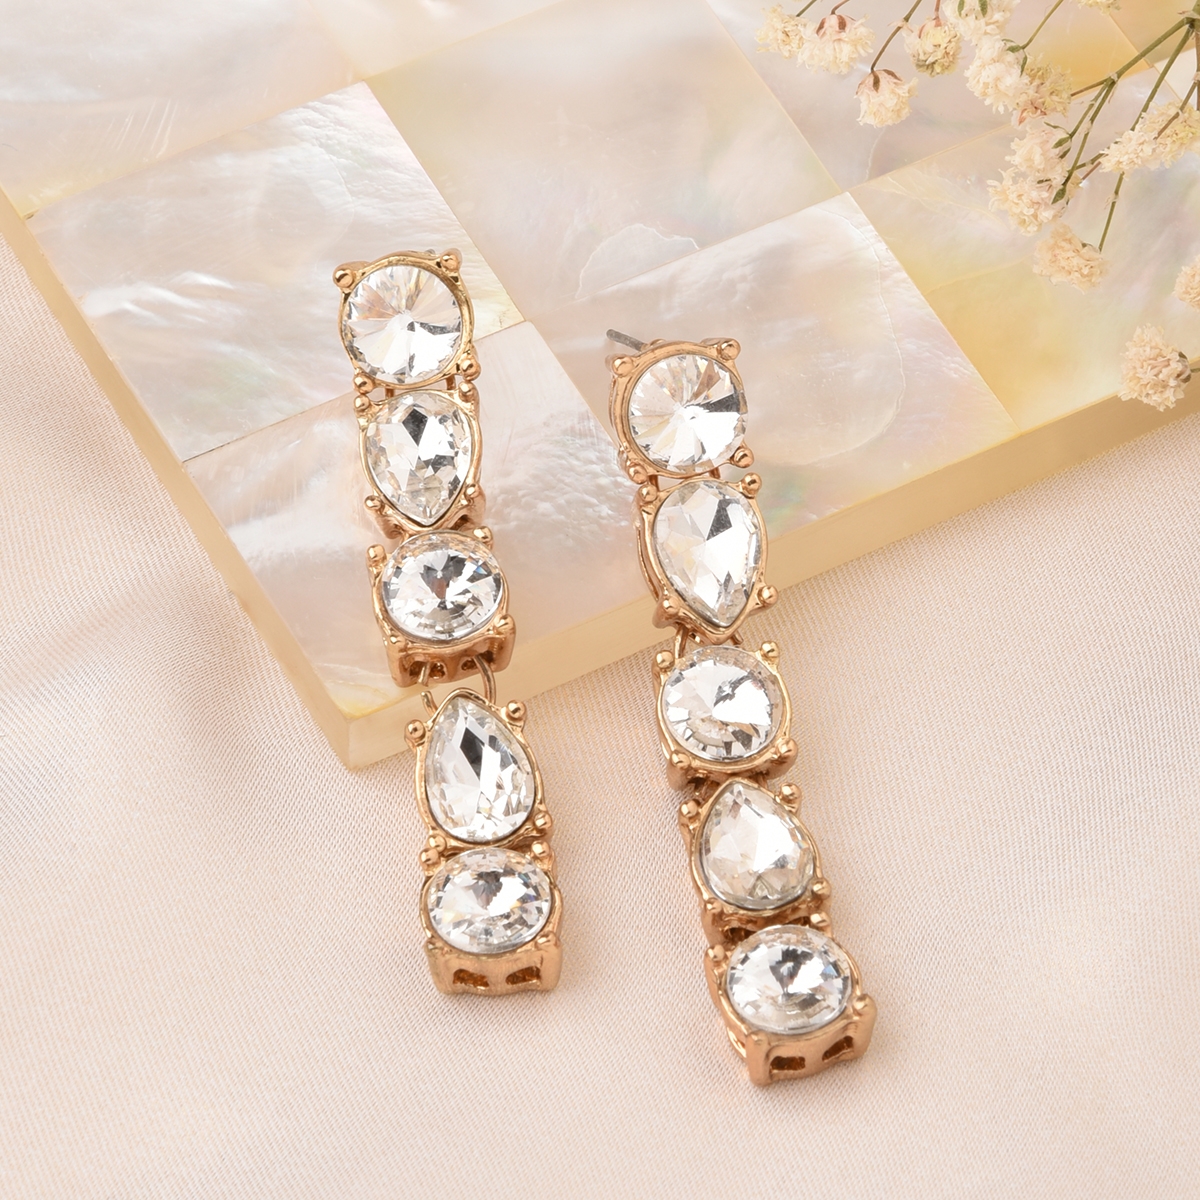 Lilly & sparkle | Lilly & Sparkle Gold Toned White Stone Studded Statement Dangler Earrings